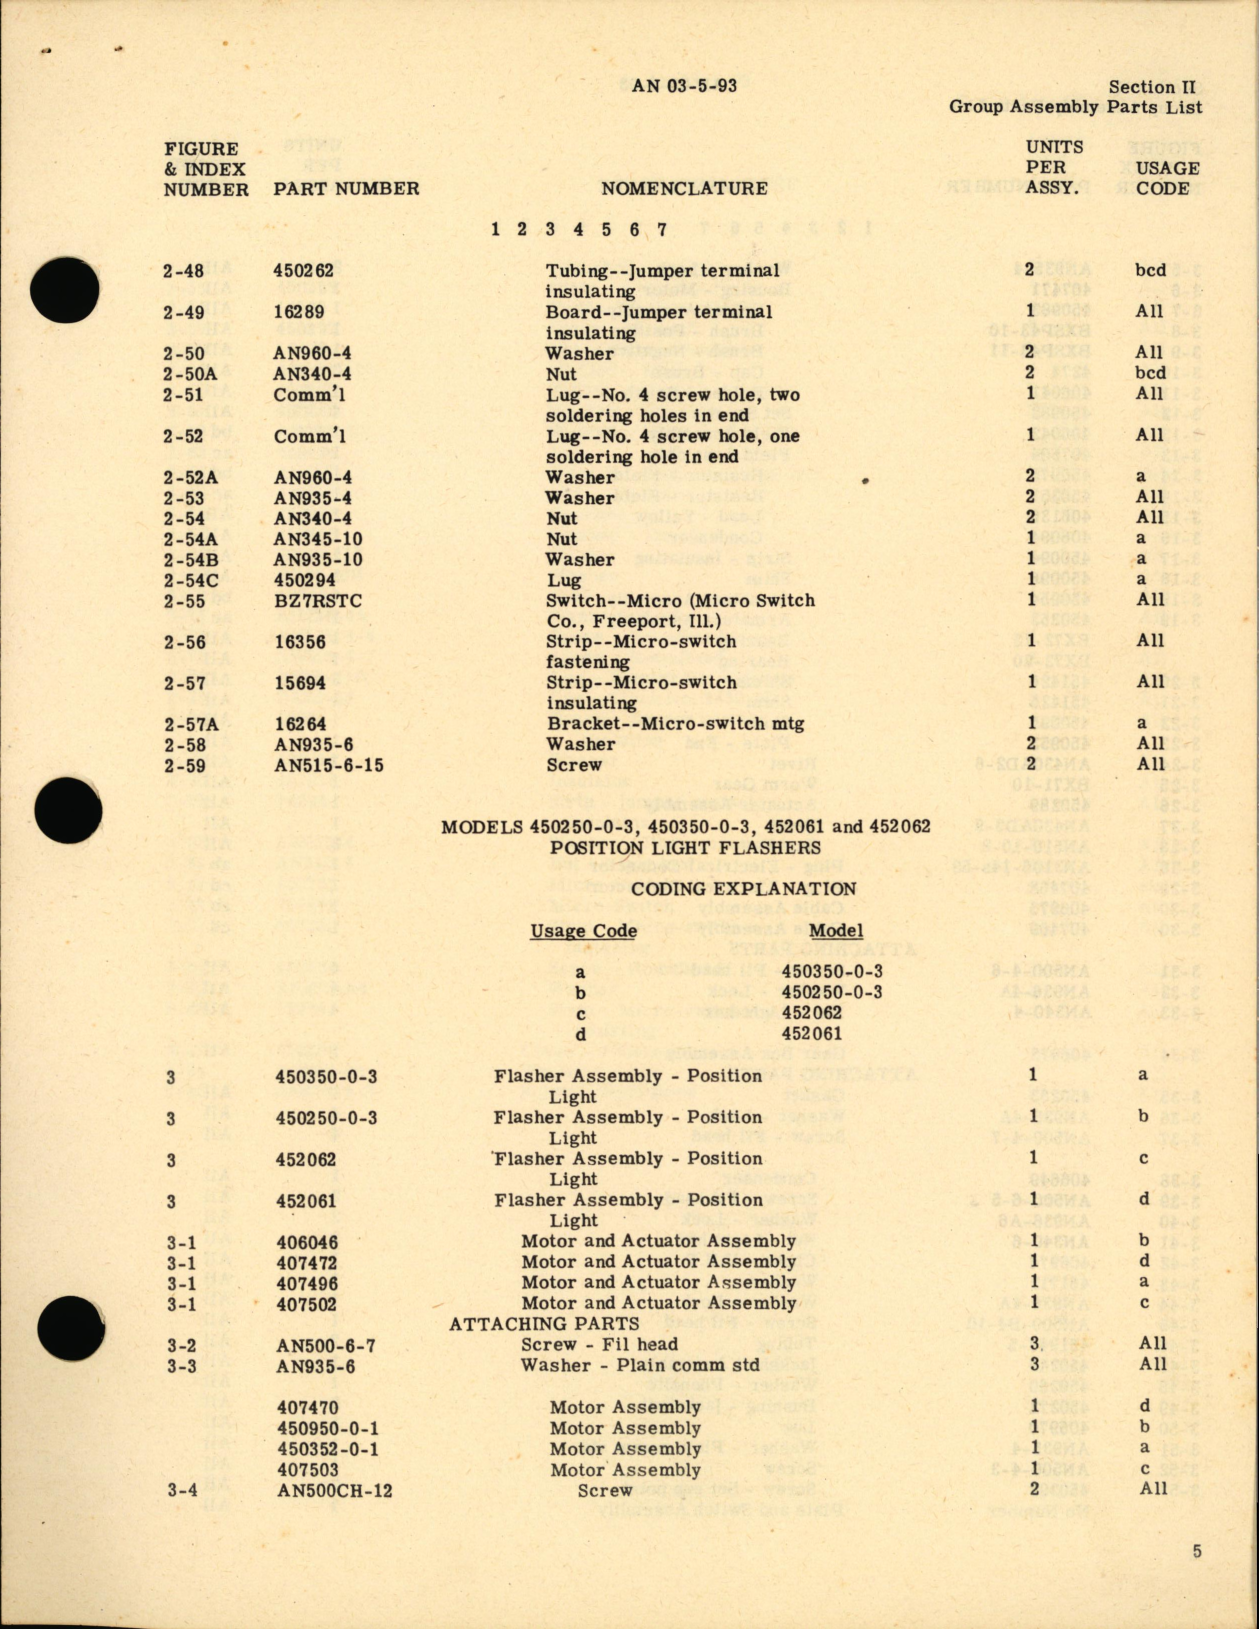 Sample page 7 from AirCorps Library document: Parts Catalog for Position Light Flashers